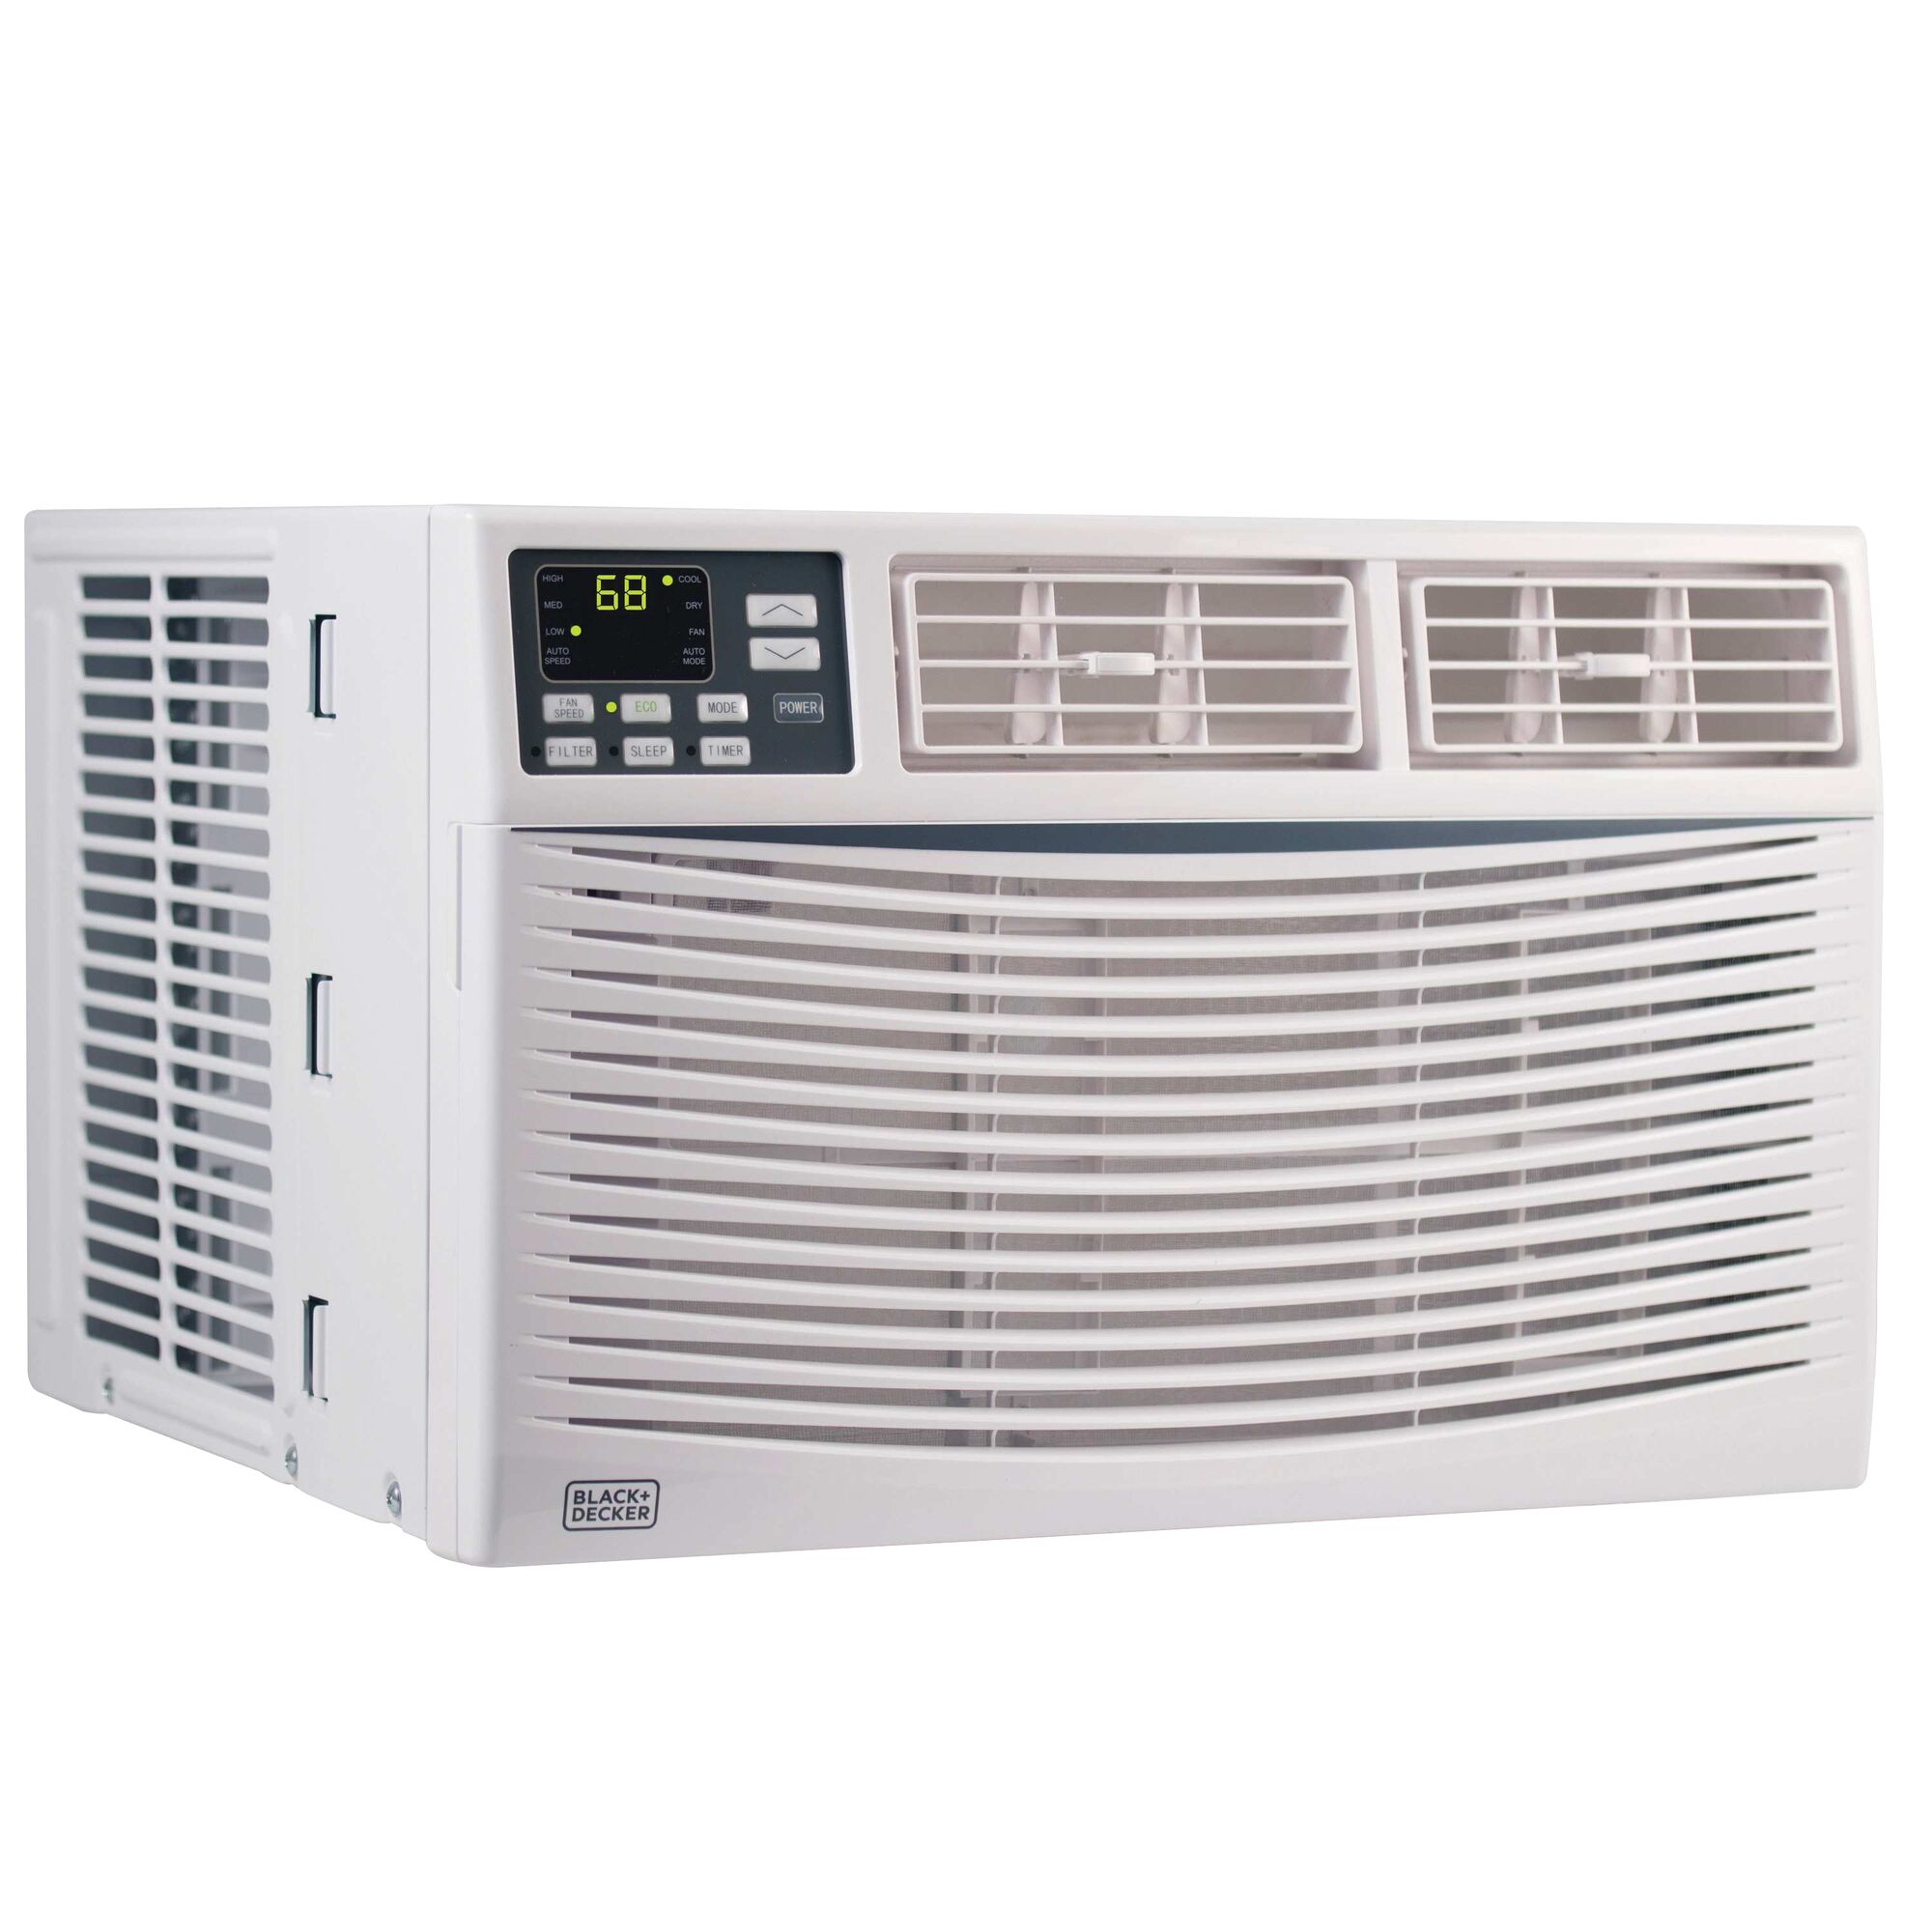 8000 B T U Energy Star Electric Air Conditioner with Remote.